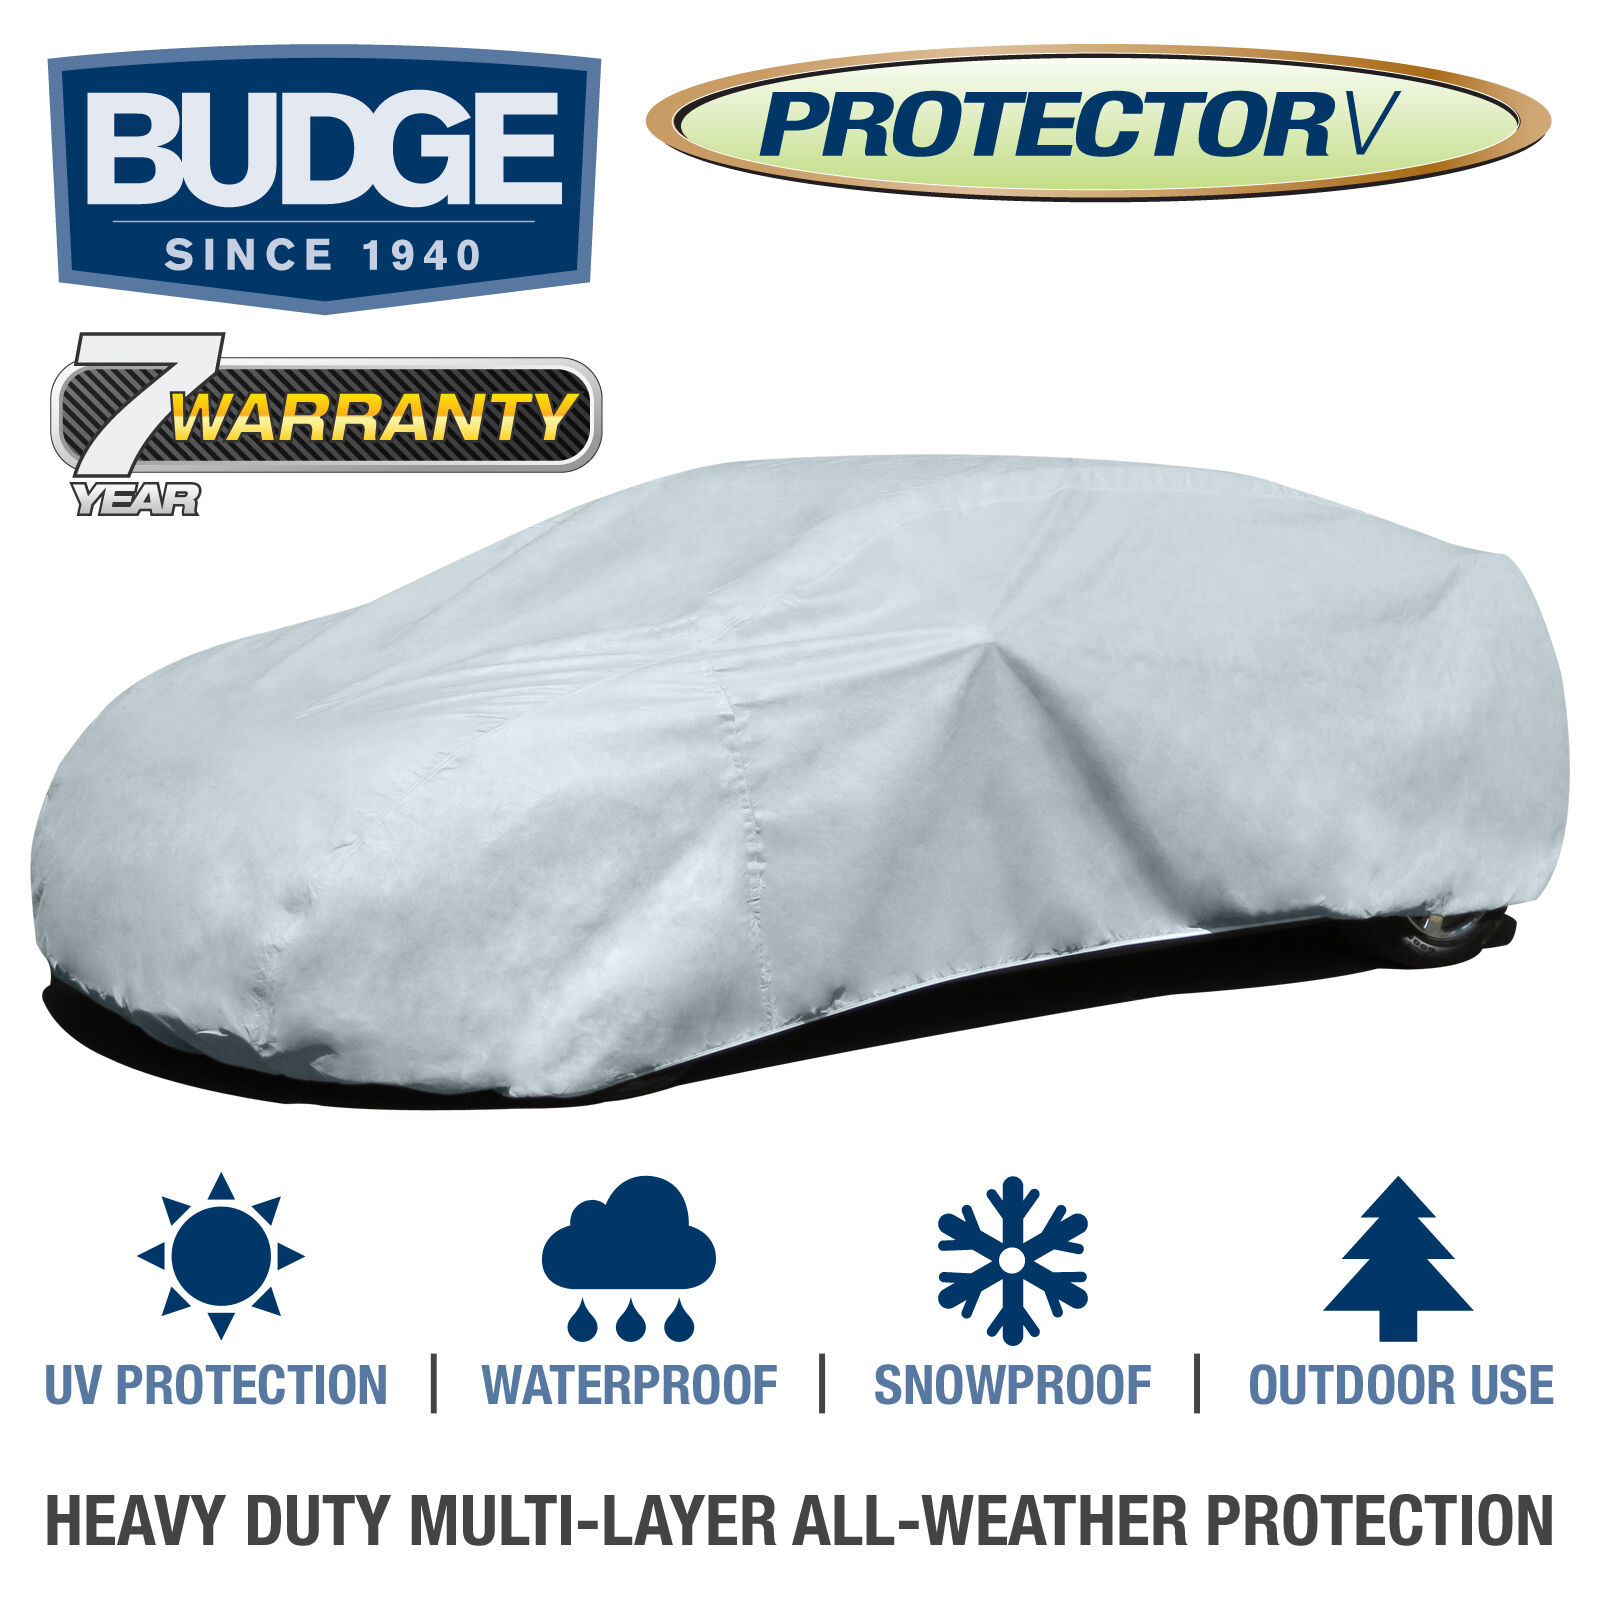 Budge Protector V Car Cover Fits Oldsmobile Cutlass Supreme 1975 | Waterproof